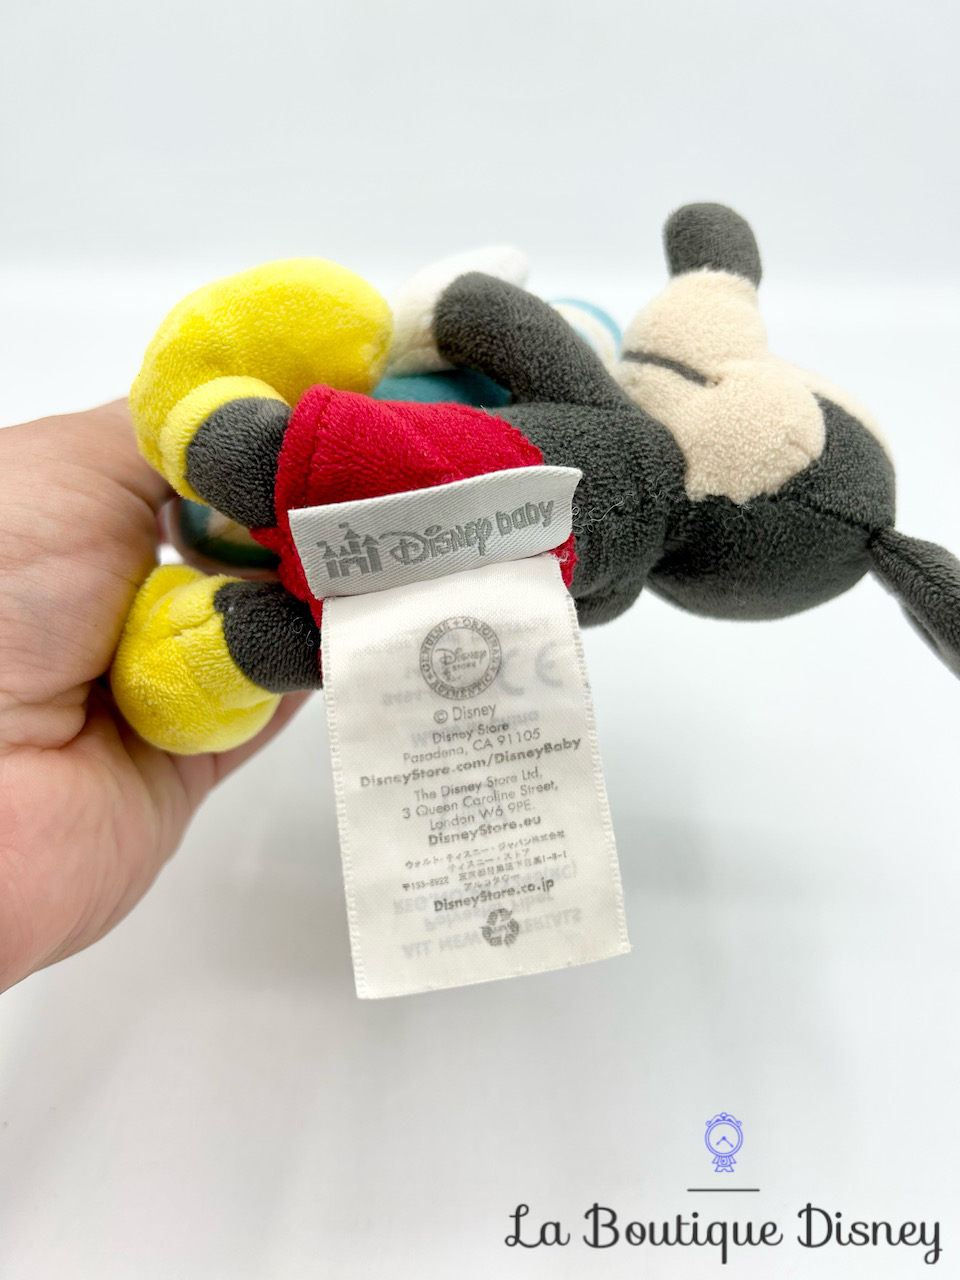 hochet-mickey-mouse-peluche-disney-store-anneau-rayures-3